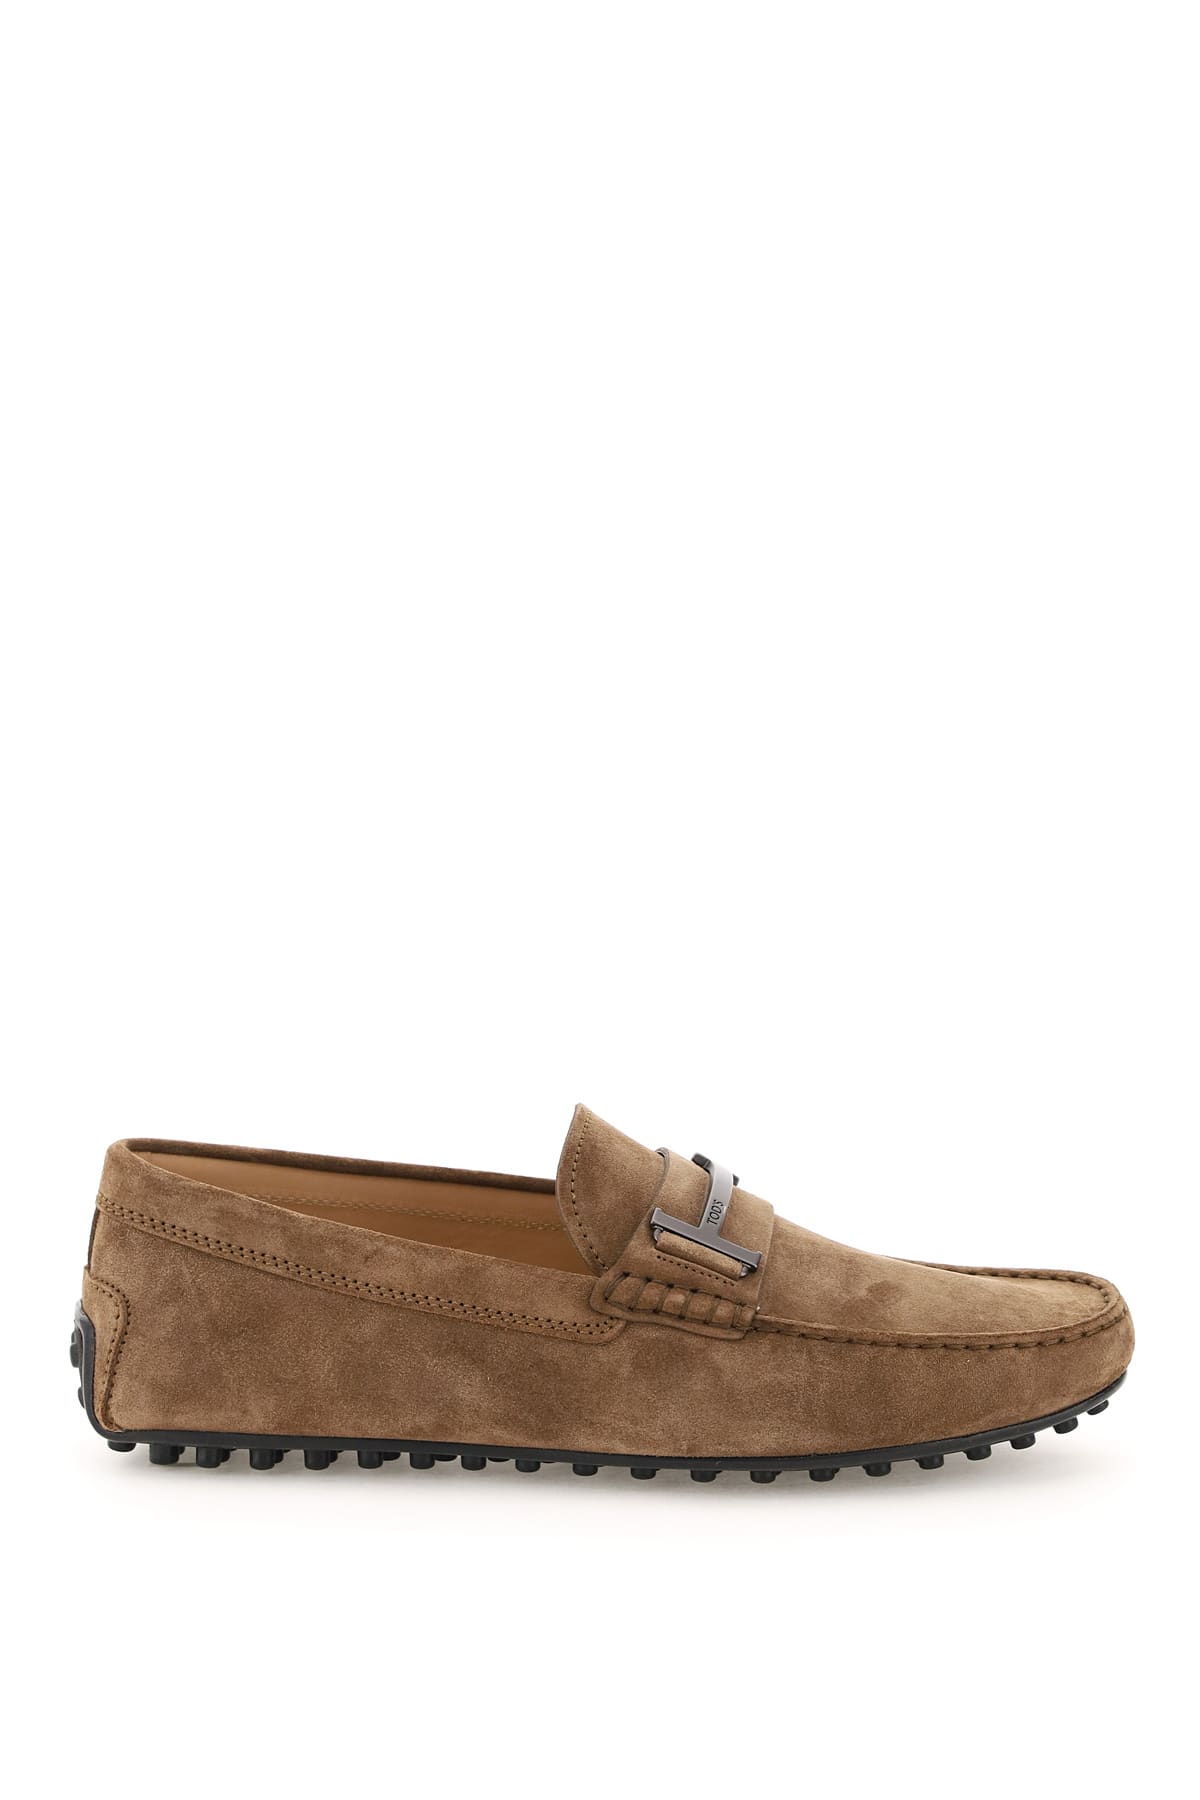 Tods Single T Suede Leather Loafers